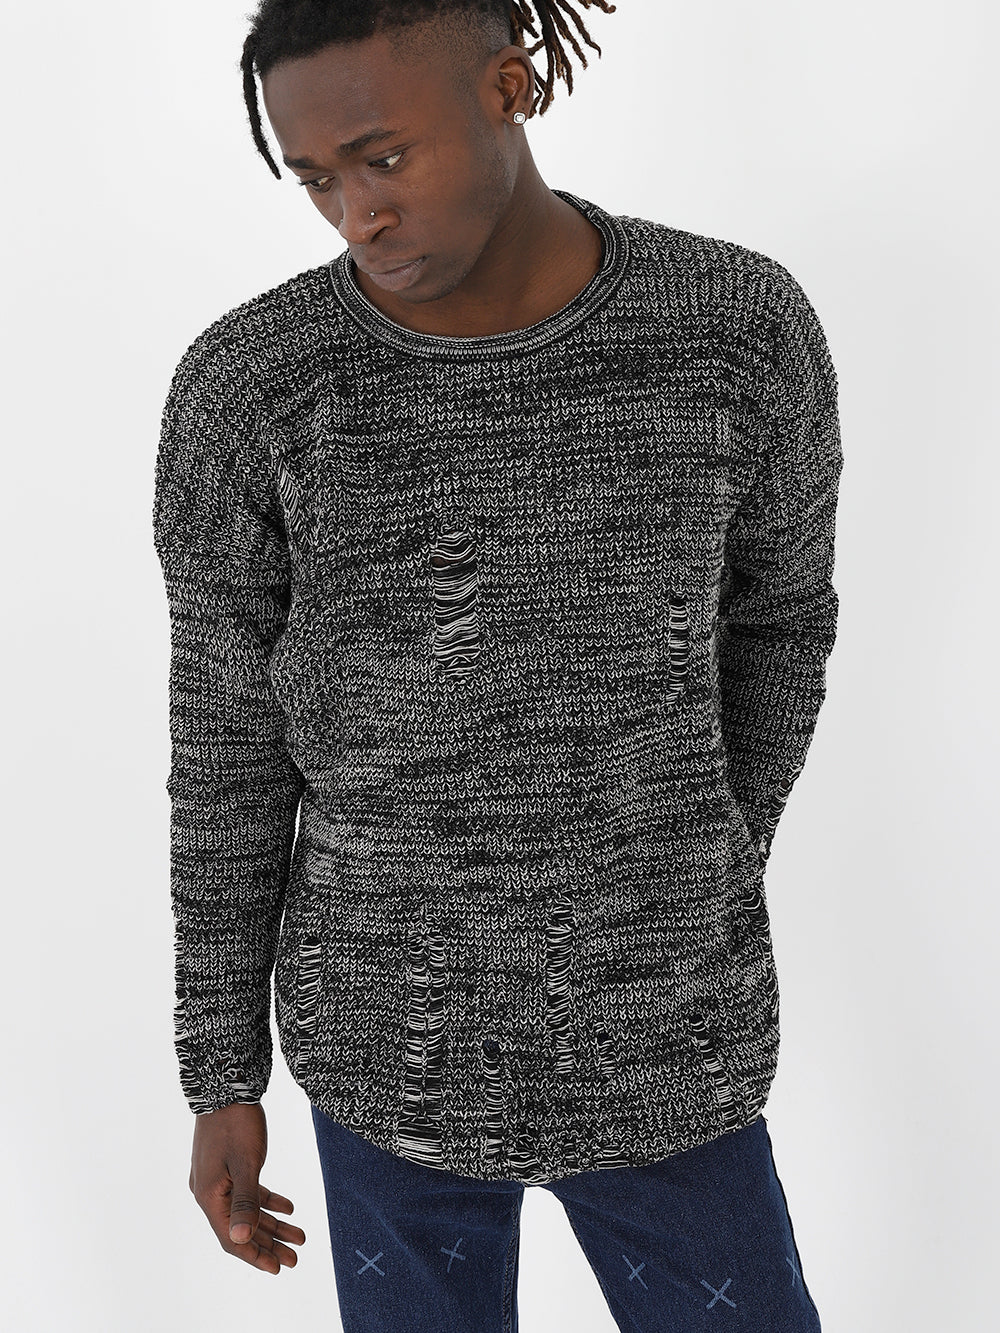 A man wearing a DISTRESSED GENTLEMAN SWEATER | GRAY with true to size fit and jeans.